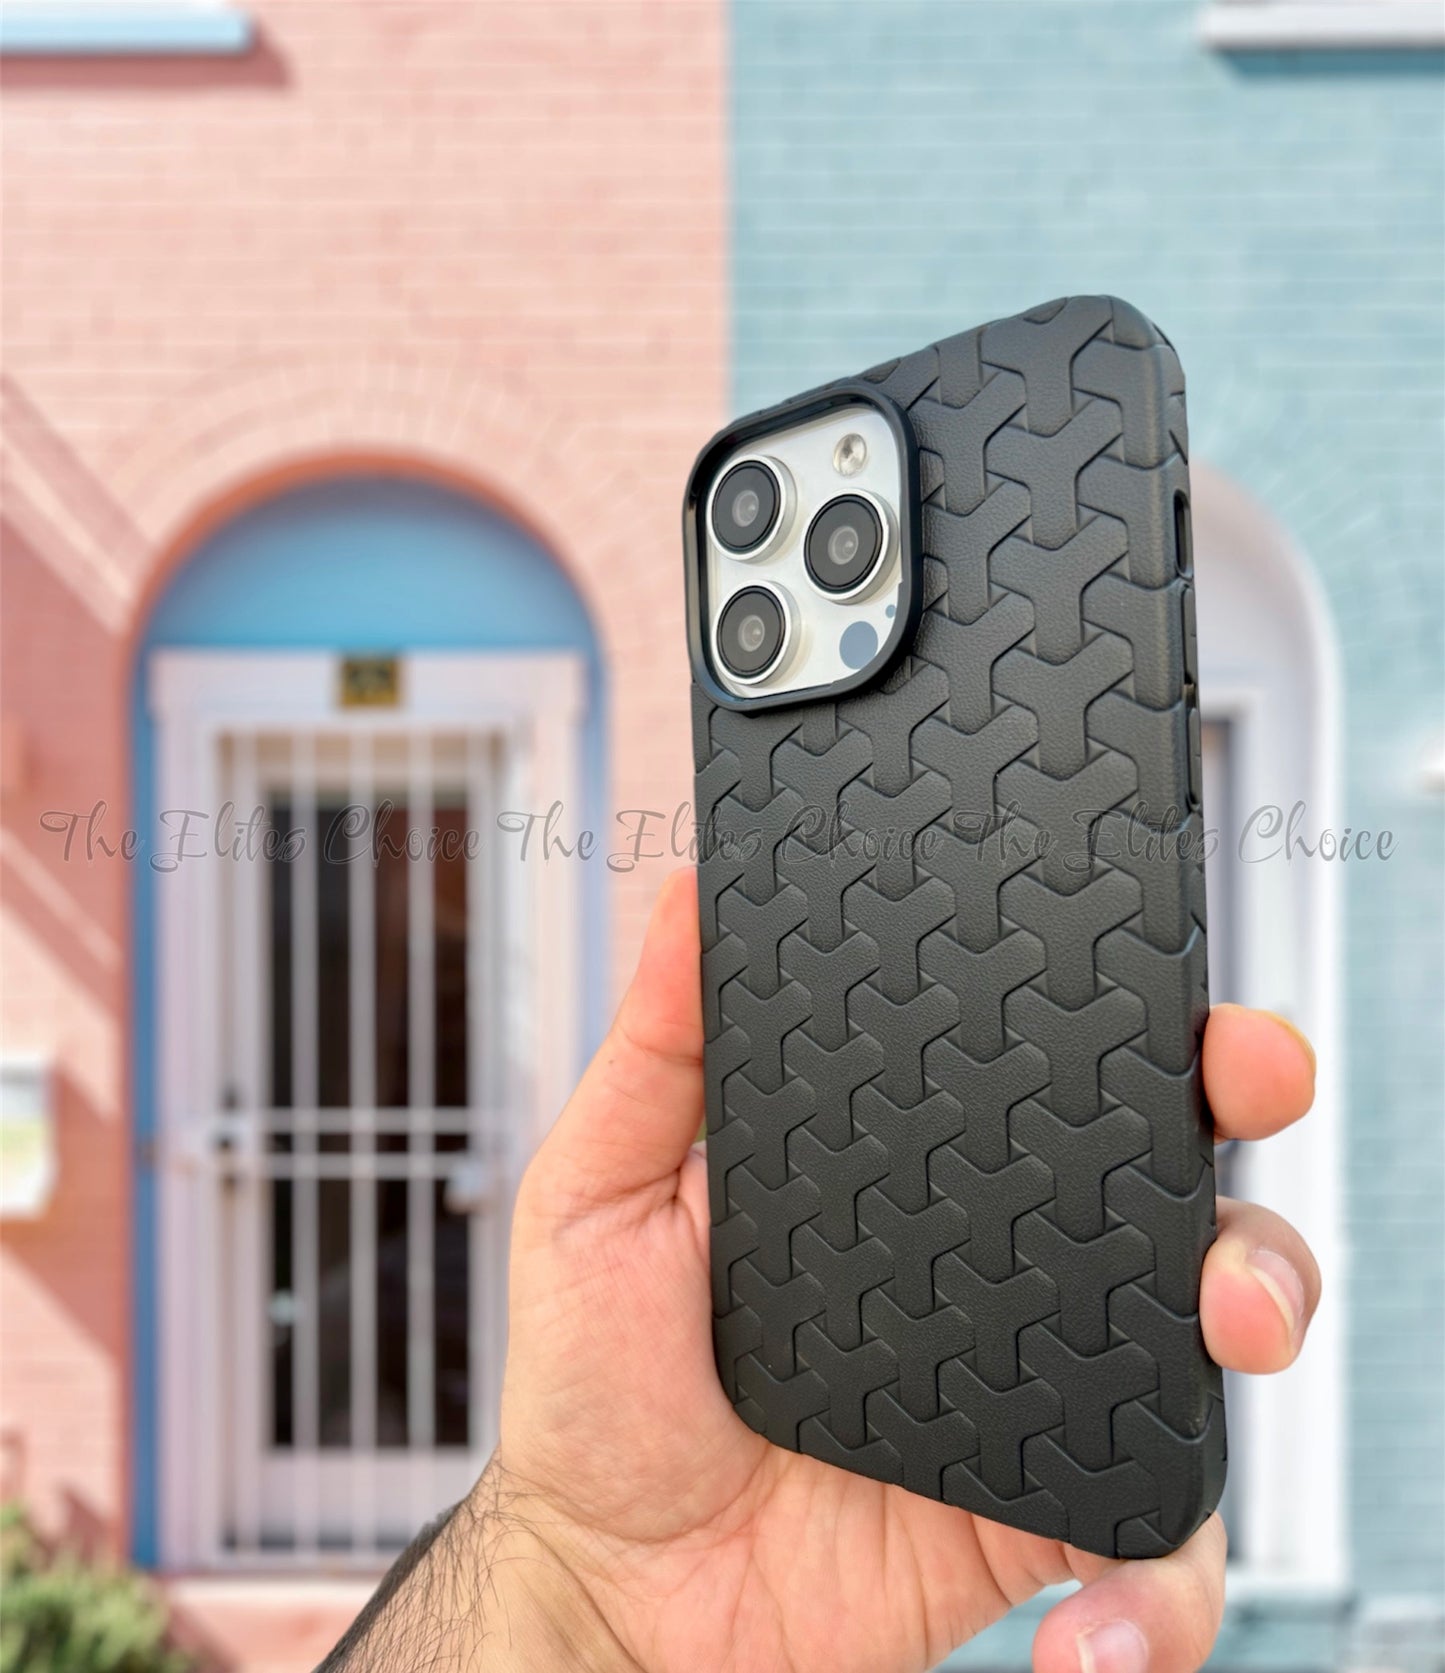 Wooven iPhone case